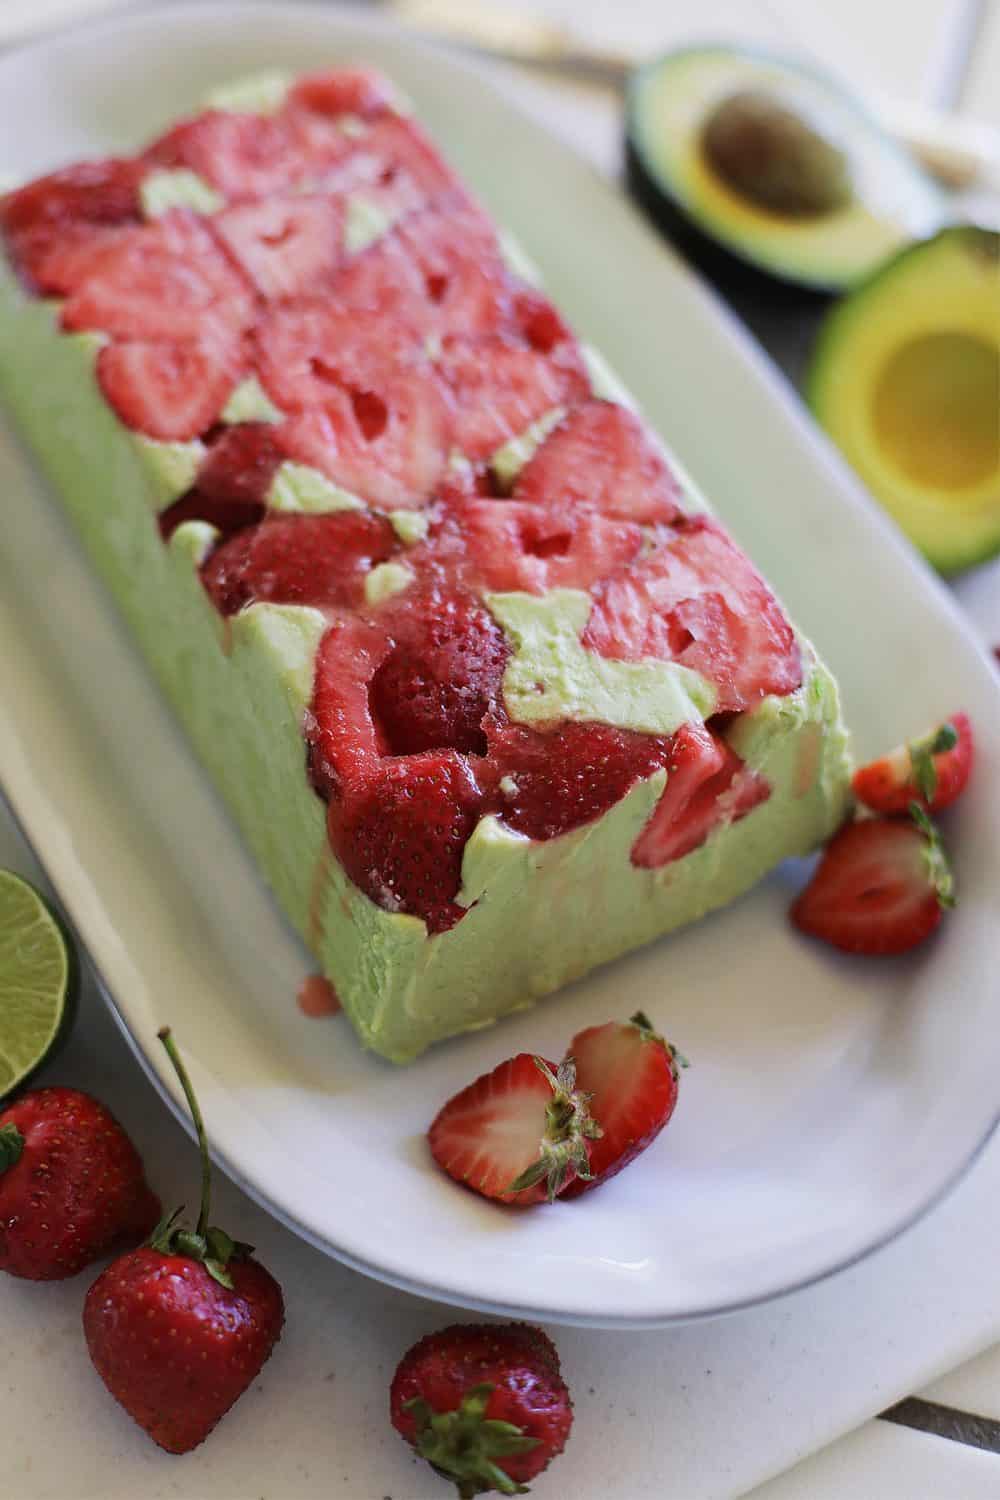 A top down look at an Avocado Coconut Strawberry Semifreddo. the semifreddo is green in color and has whole red raspberries frozen into the top .